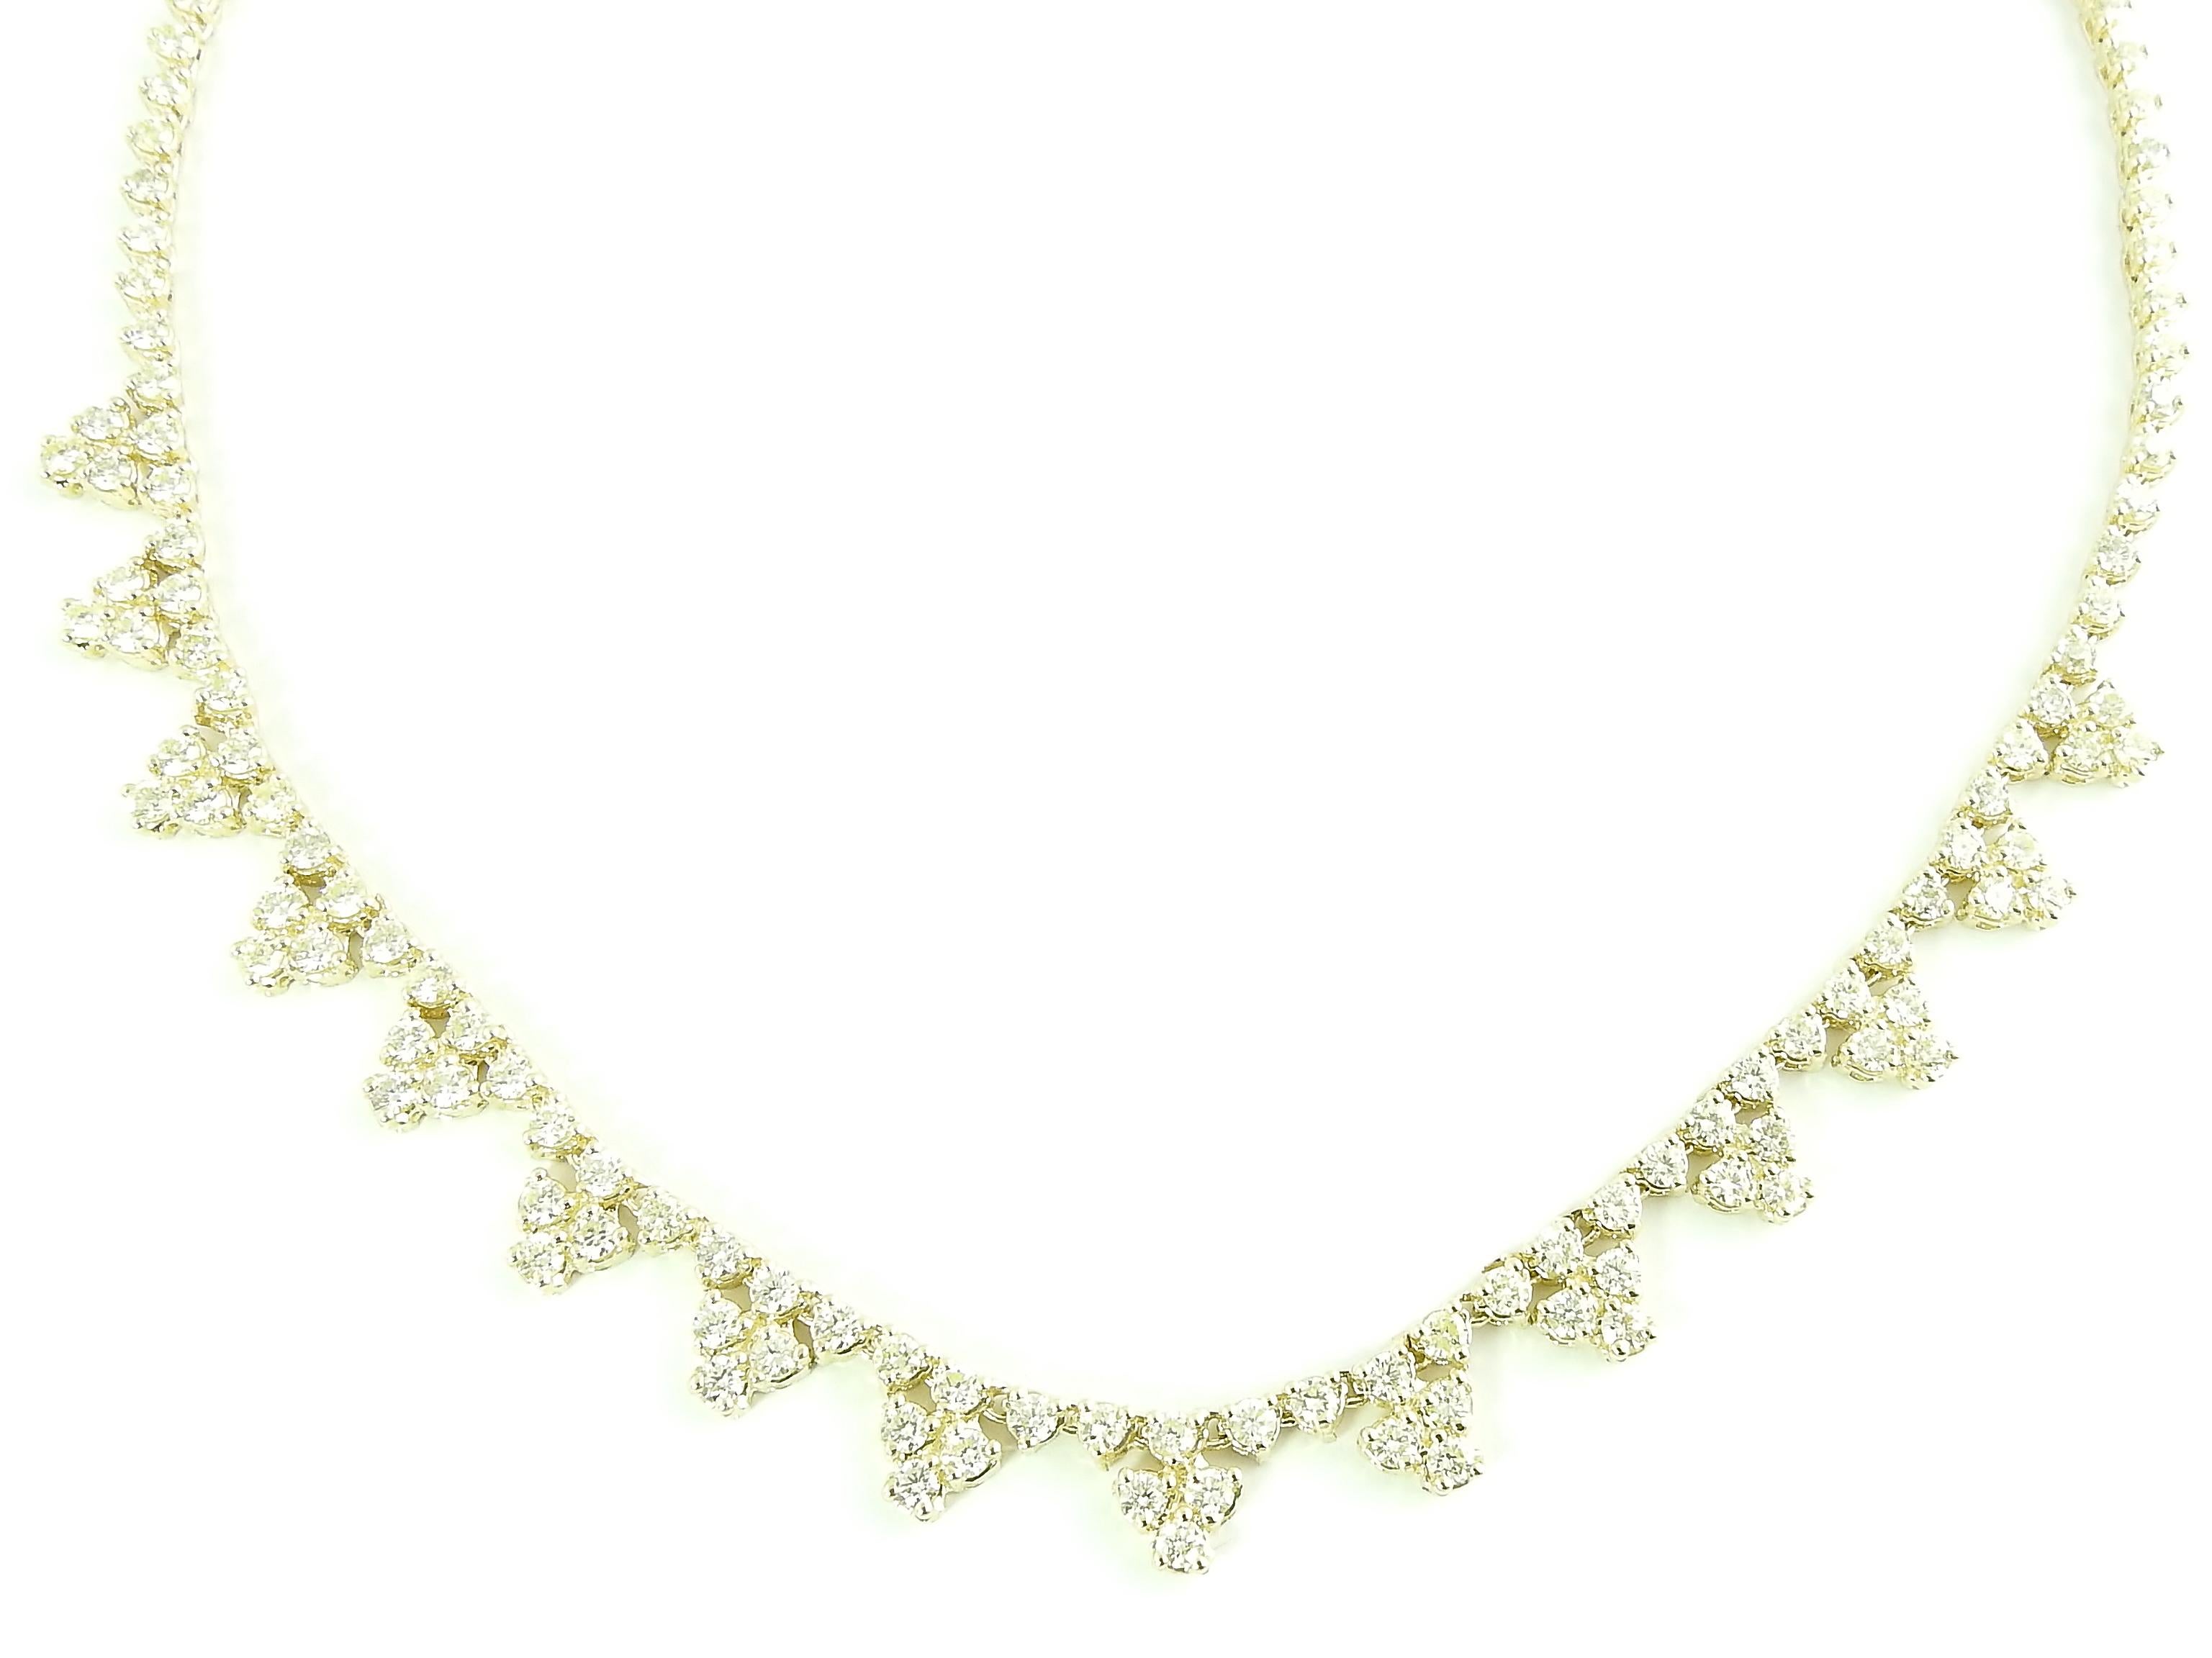 Vintage 14K Yellow Gold Diamond Necklace

This gorgeous diamond filled gold necklace is perfect for stepping out!

Necklace is set with 158 round brilliant diamonds.

Diamonds total approx. 12.64 cts

Diamonds are of SI1 - I1 clarity and J-L